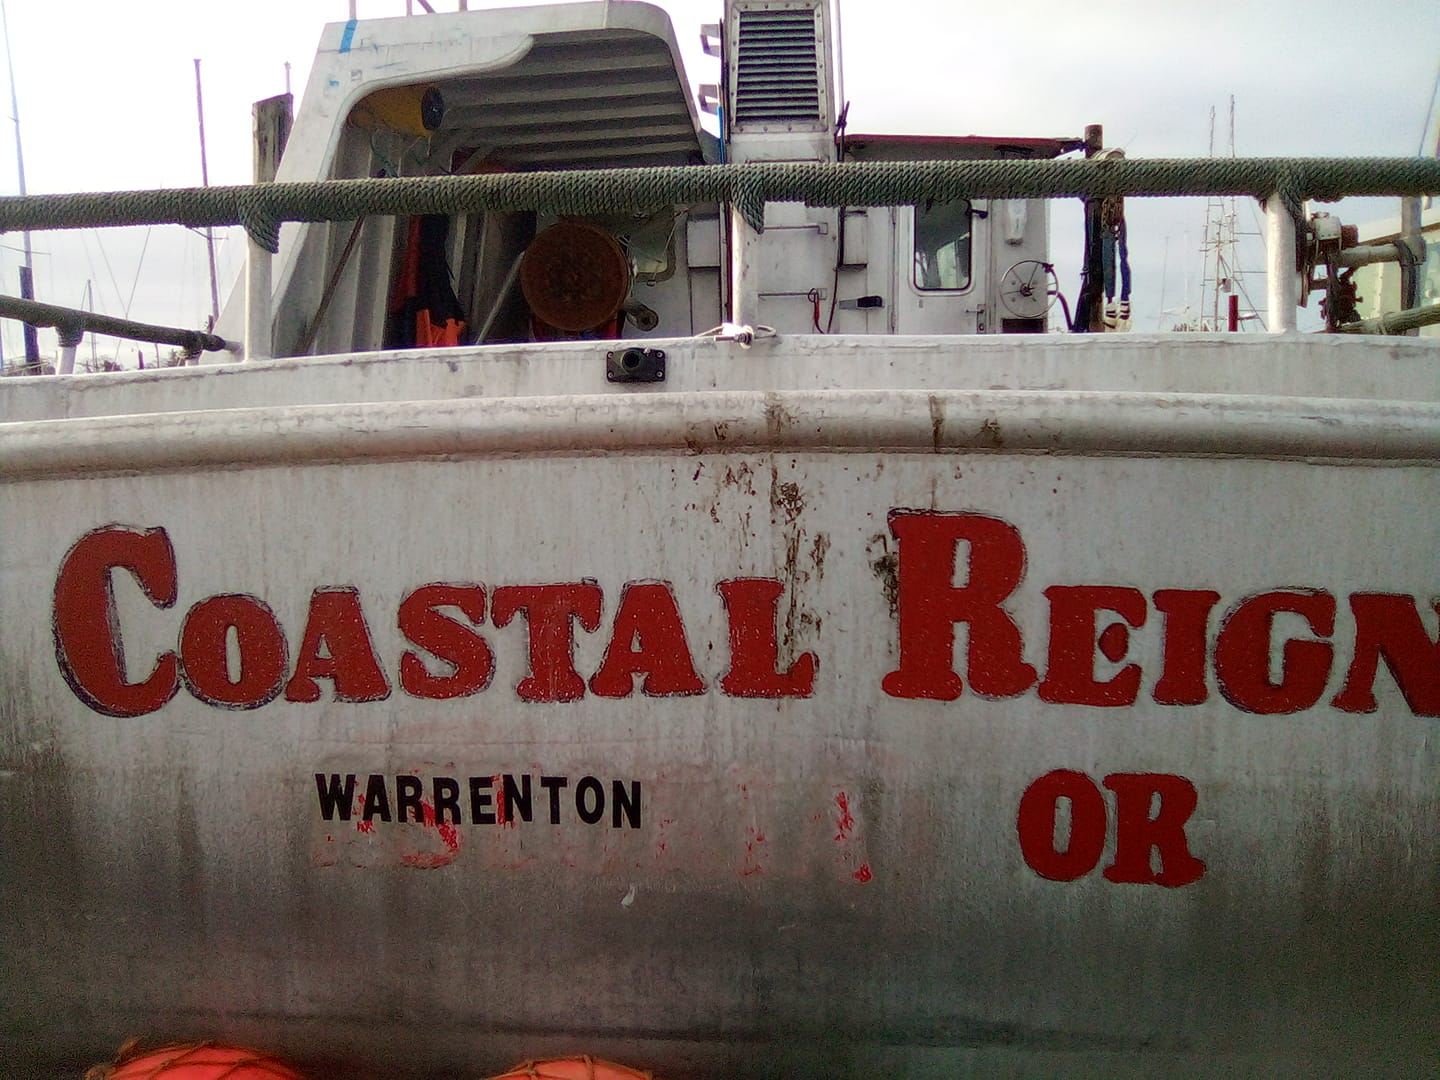 Coast Guard to present Coastal Reign accident findings